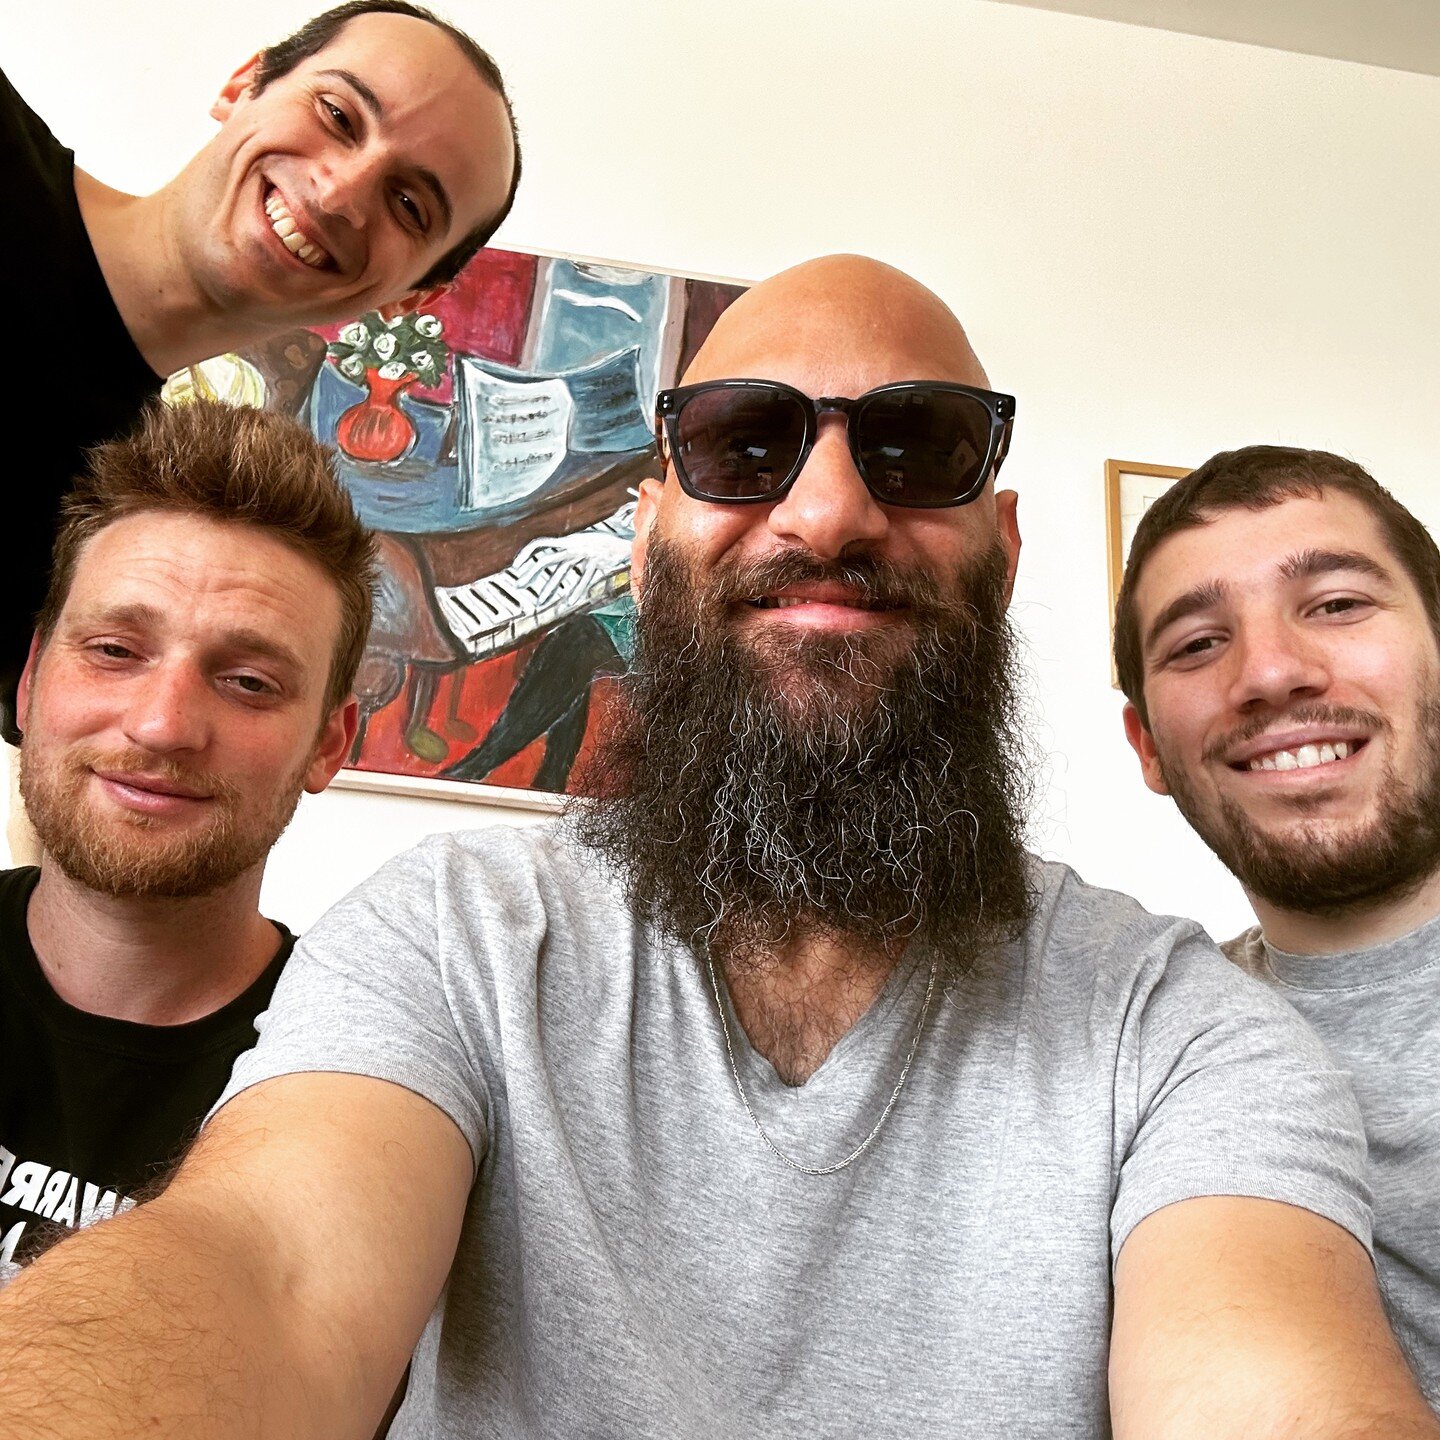 The cats are in great spirits in Tel Aviv, rehearsing for tomorrow night's show at Gray TLV ! 🎷😻
.
Last tickets remaining, get yours now! 
.
🎟 Tickets: Link in bio
.
May 18th, Gray TLV featuring Eli Degibri on Saxophones, Tom Oren on Piano, Alon N